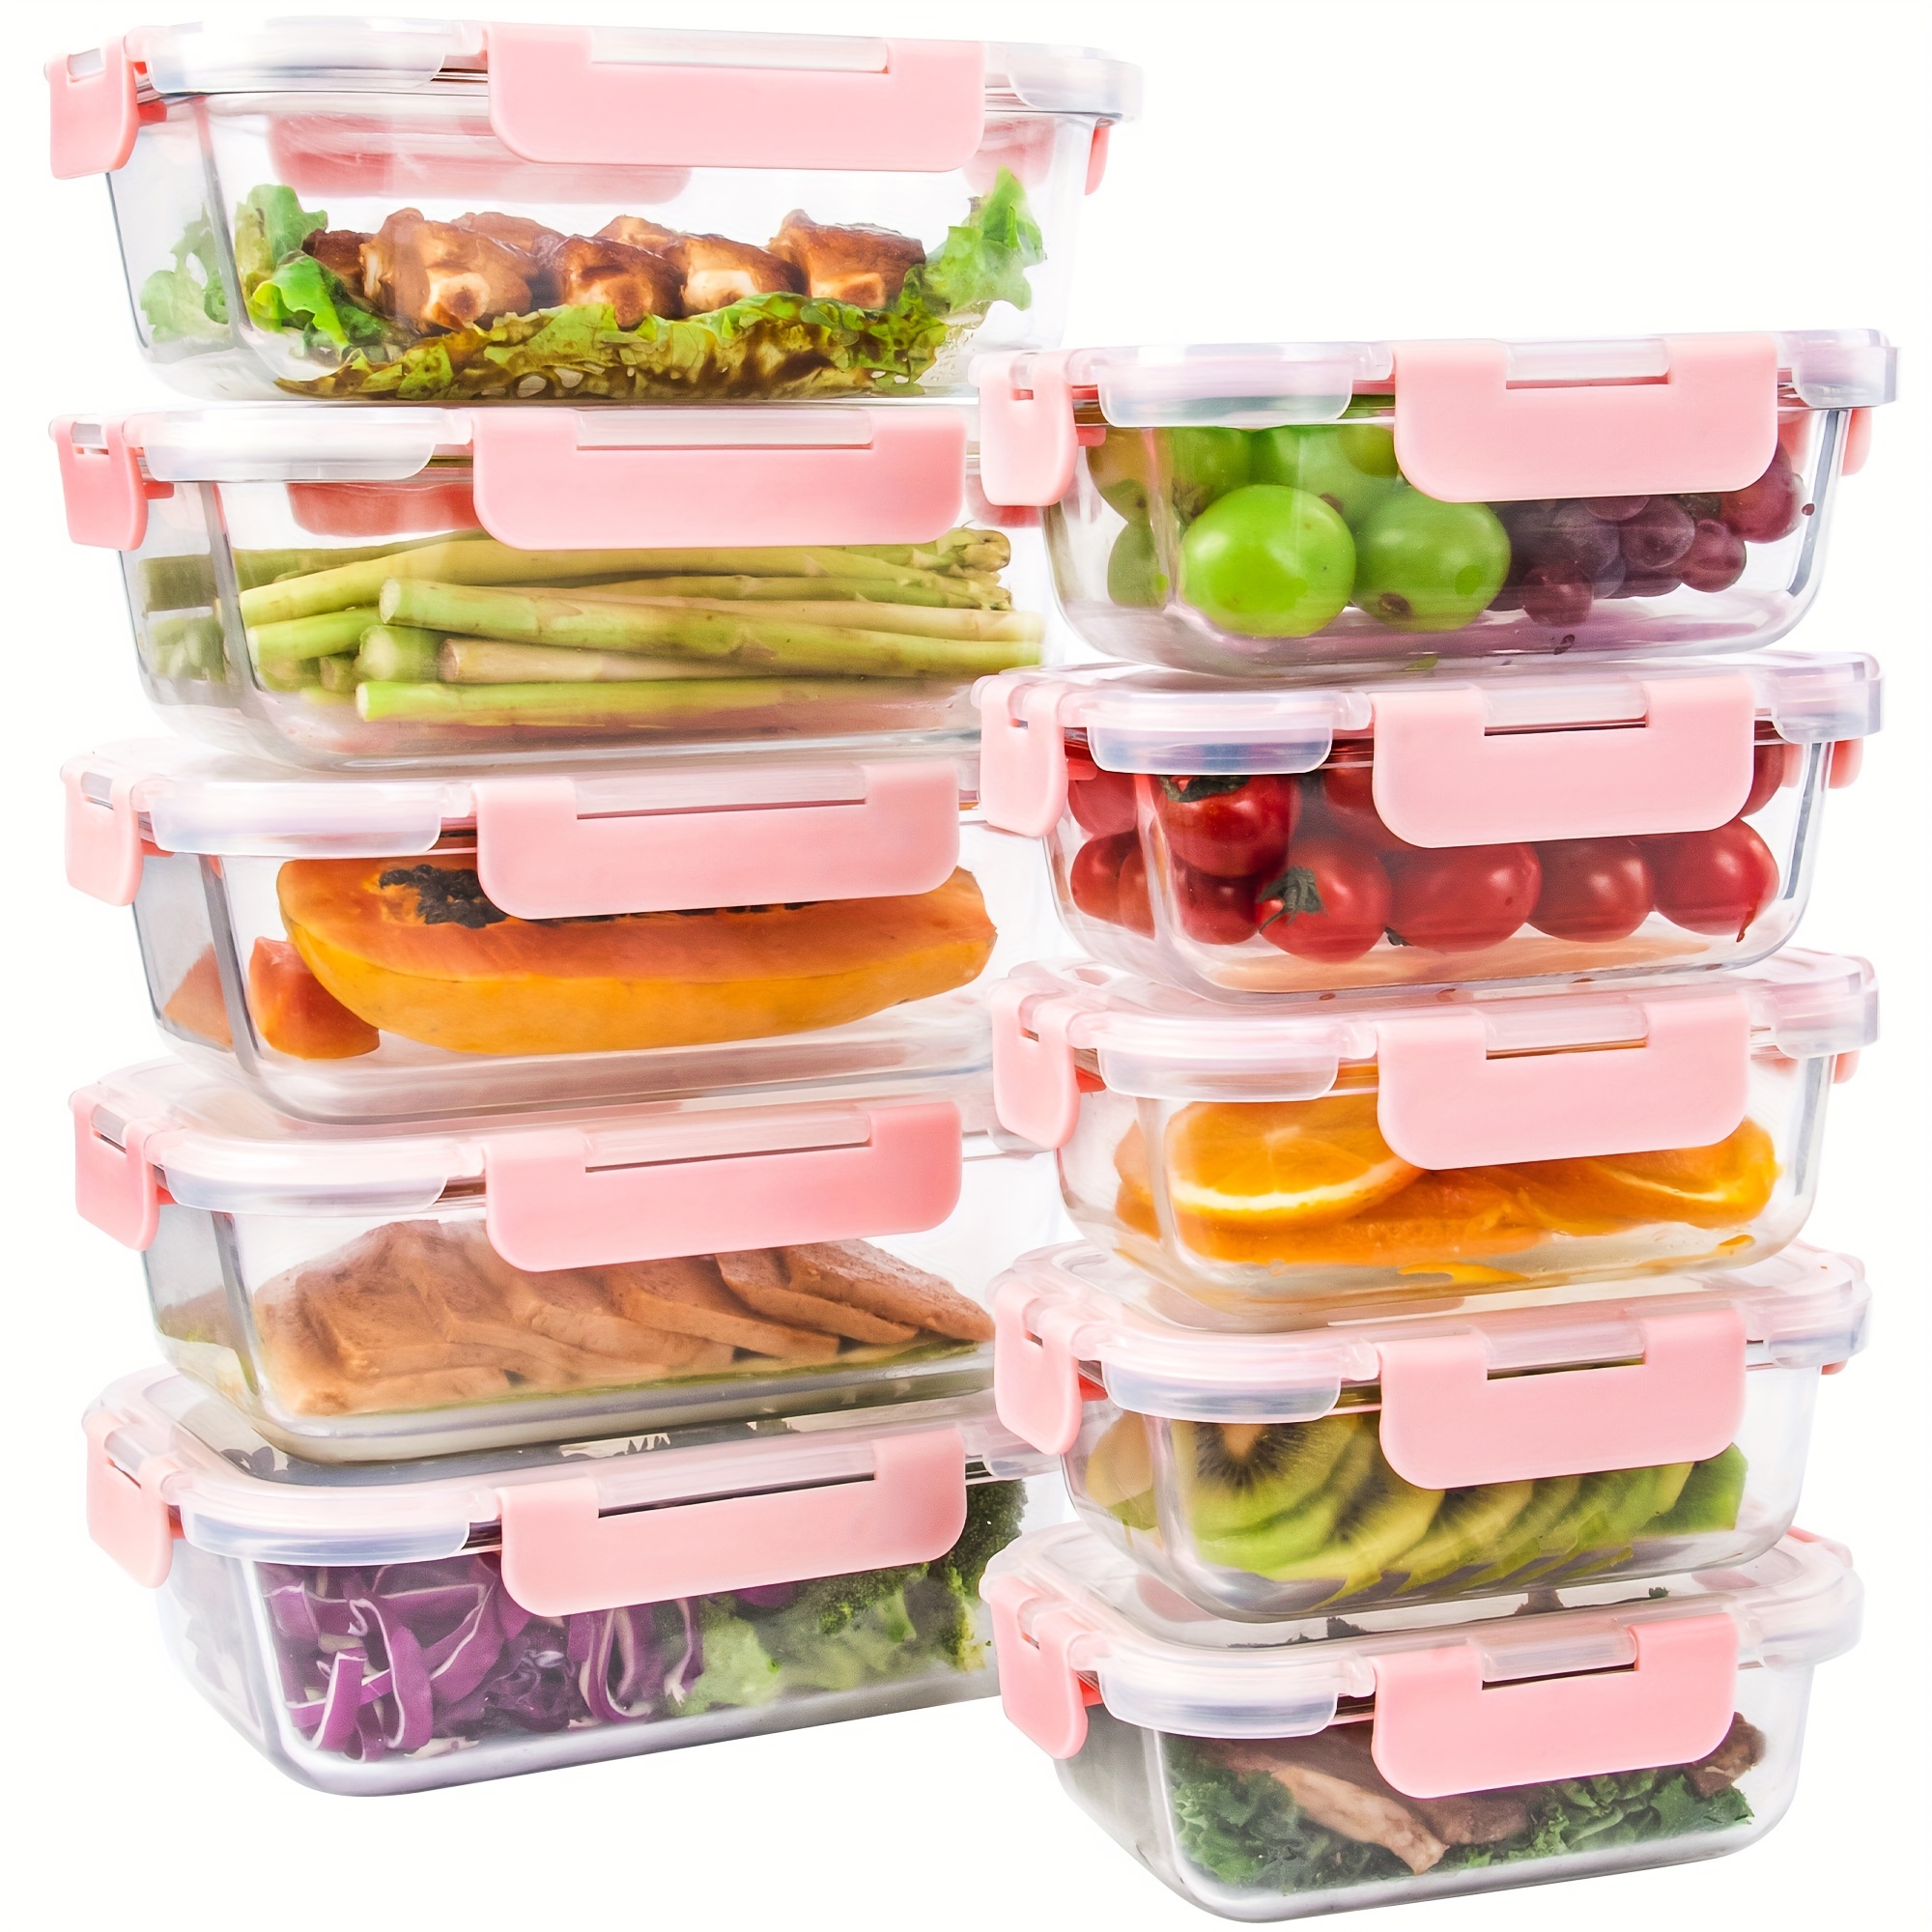 

[10 Pack] Glass Meal Prep Containers, Food Storage Containers With Lids Airtight, Glass Lunch Boxes, Microwave, Oven, Freezer And Dishwasher Safe